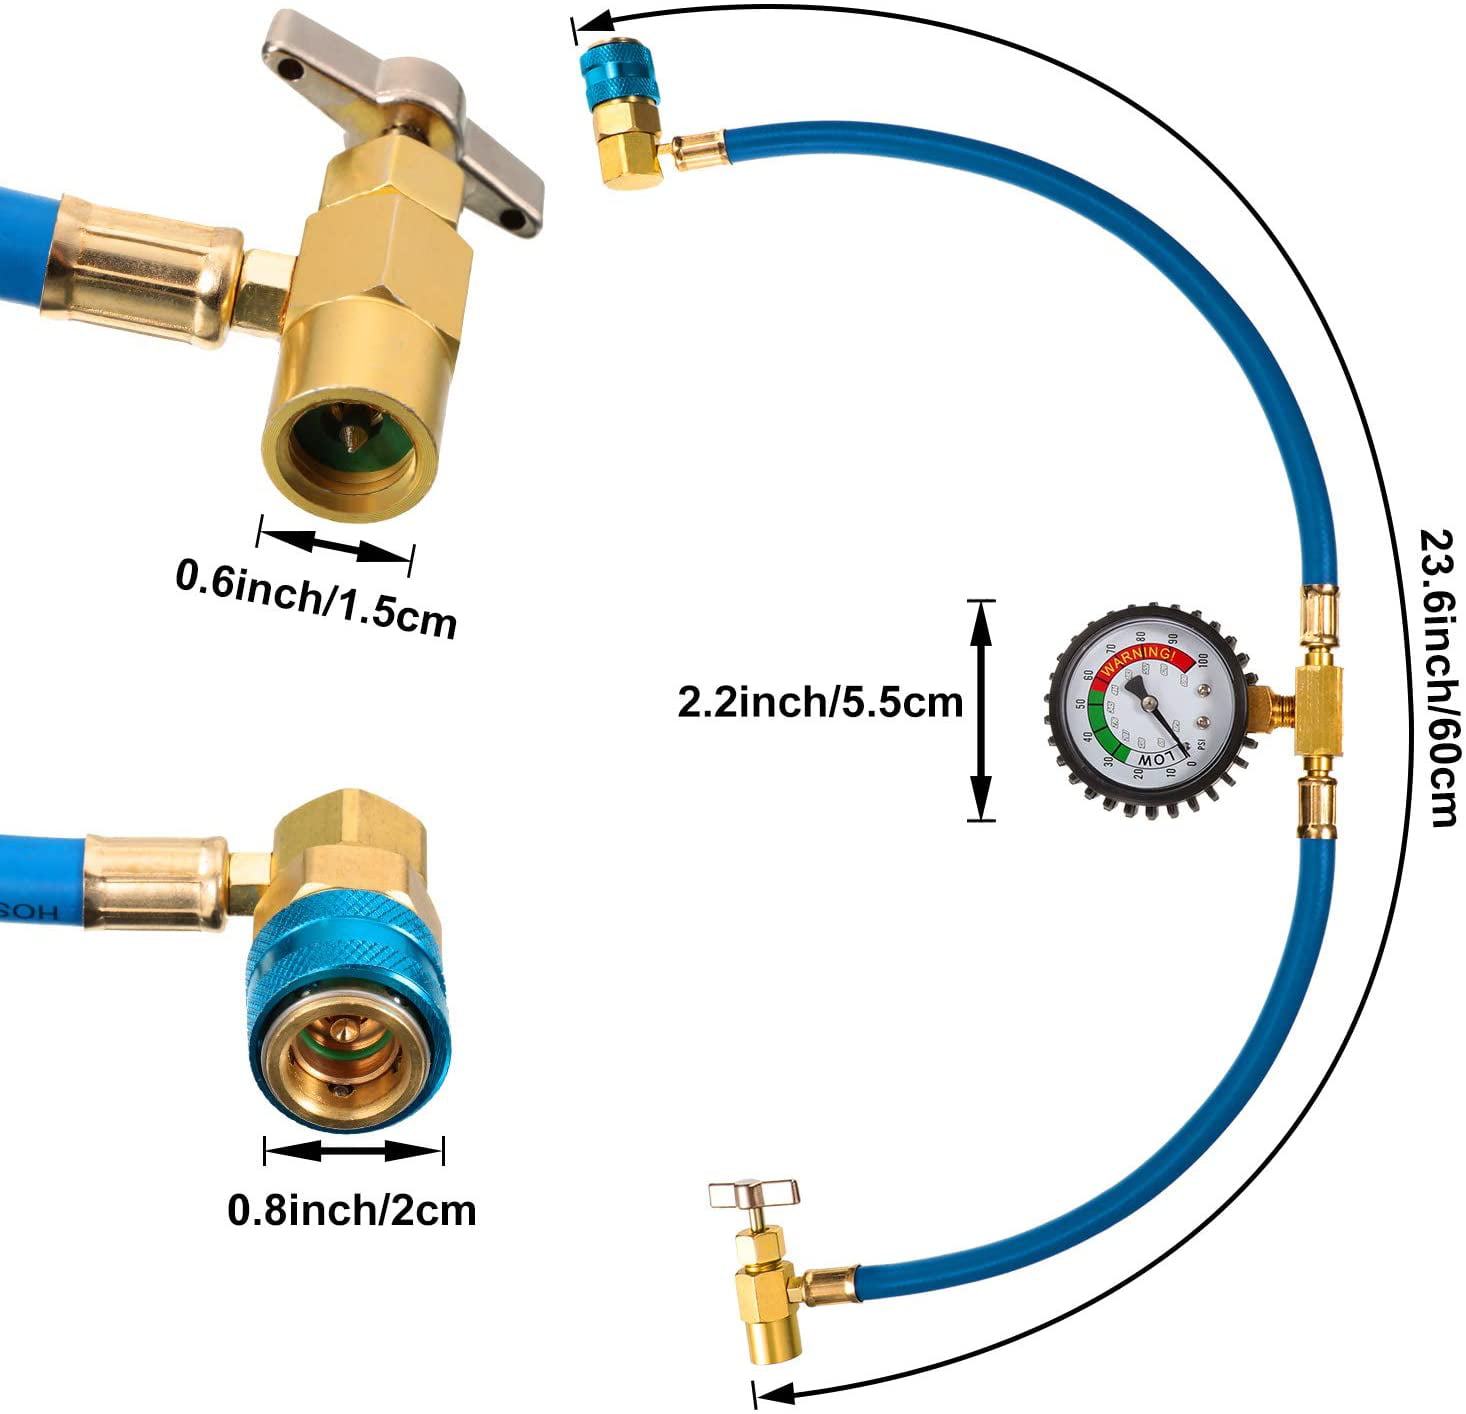 3 Pack BPV31 Bullet Piercing Tap Valve Kits U-Charging Hose Refrigerant Can Tap with Gauge R134a Can Connect to R12/R22 Port AC 1/2 and Universal Retrofit Valve with Dust Cap 